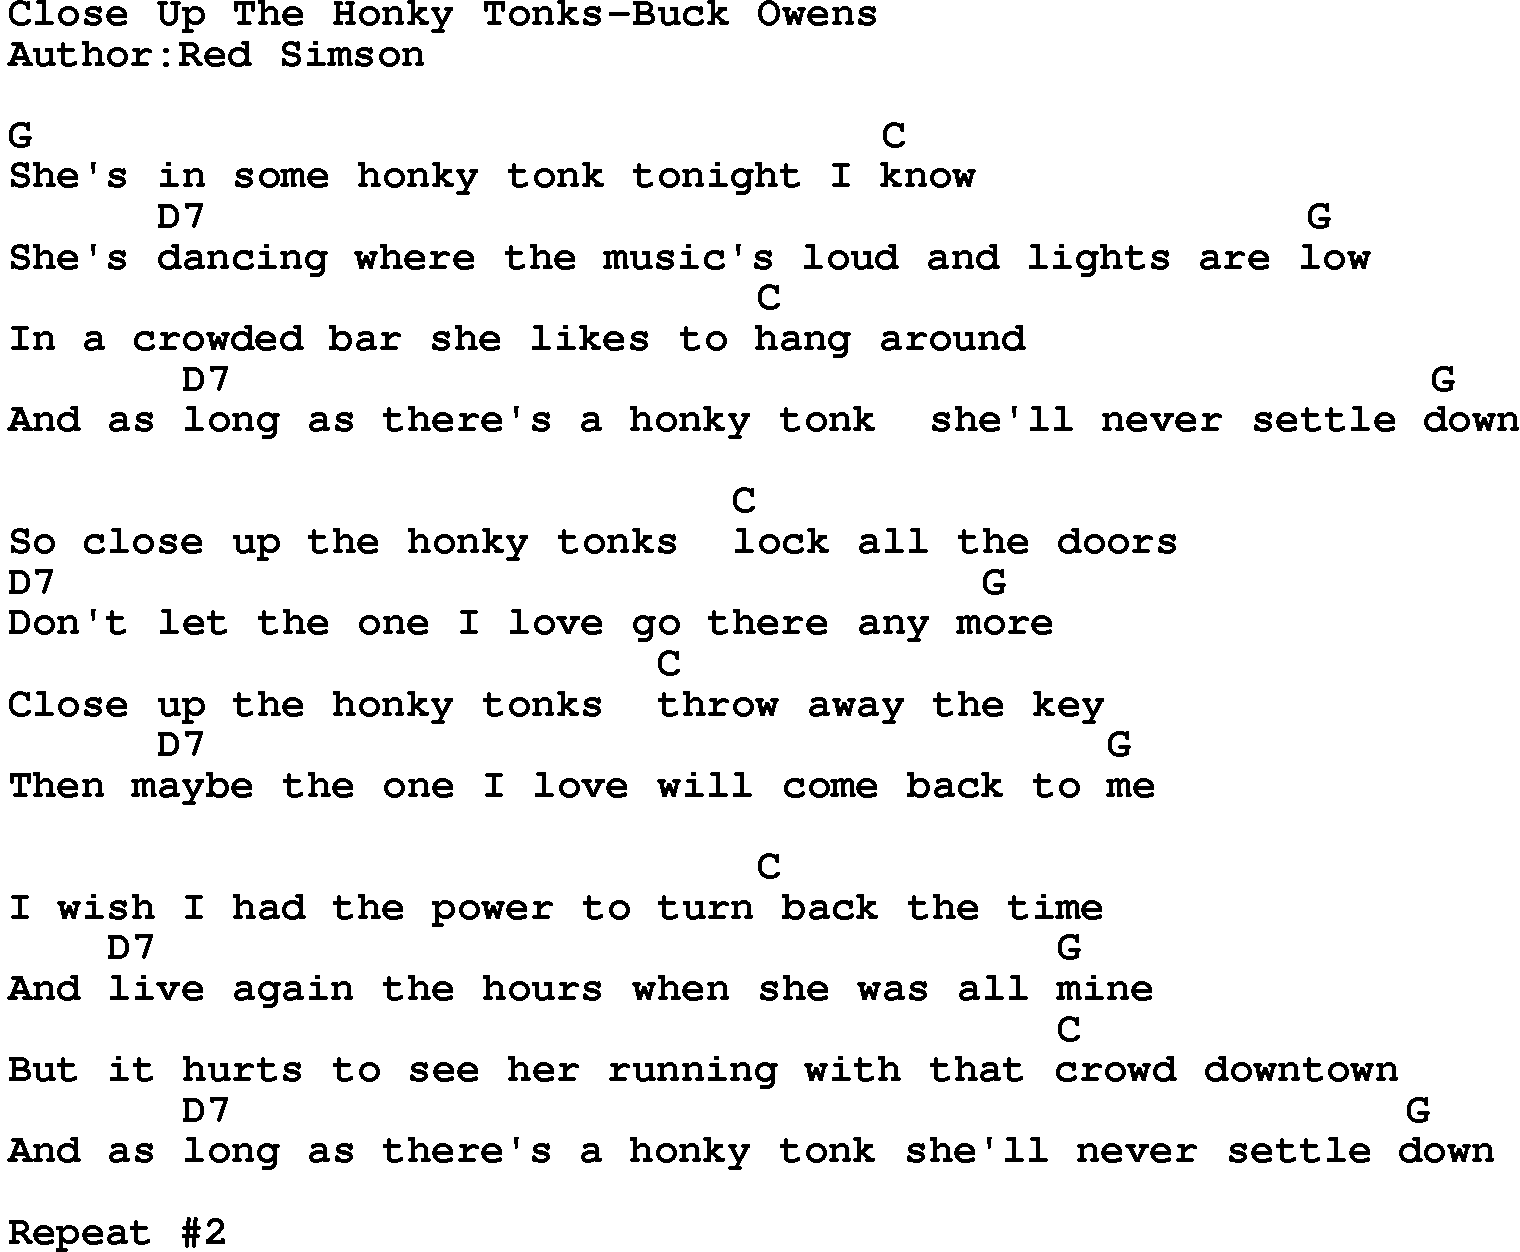 Country music song: Close Up The Honky Tonks-Buck Owens lyrics and chords